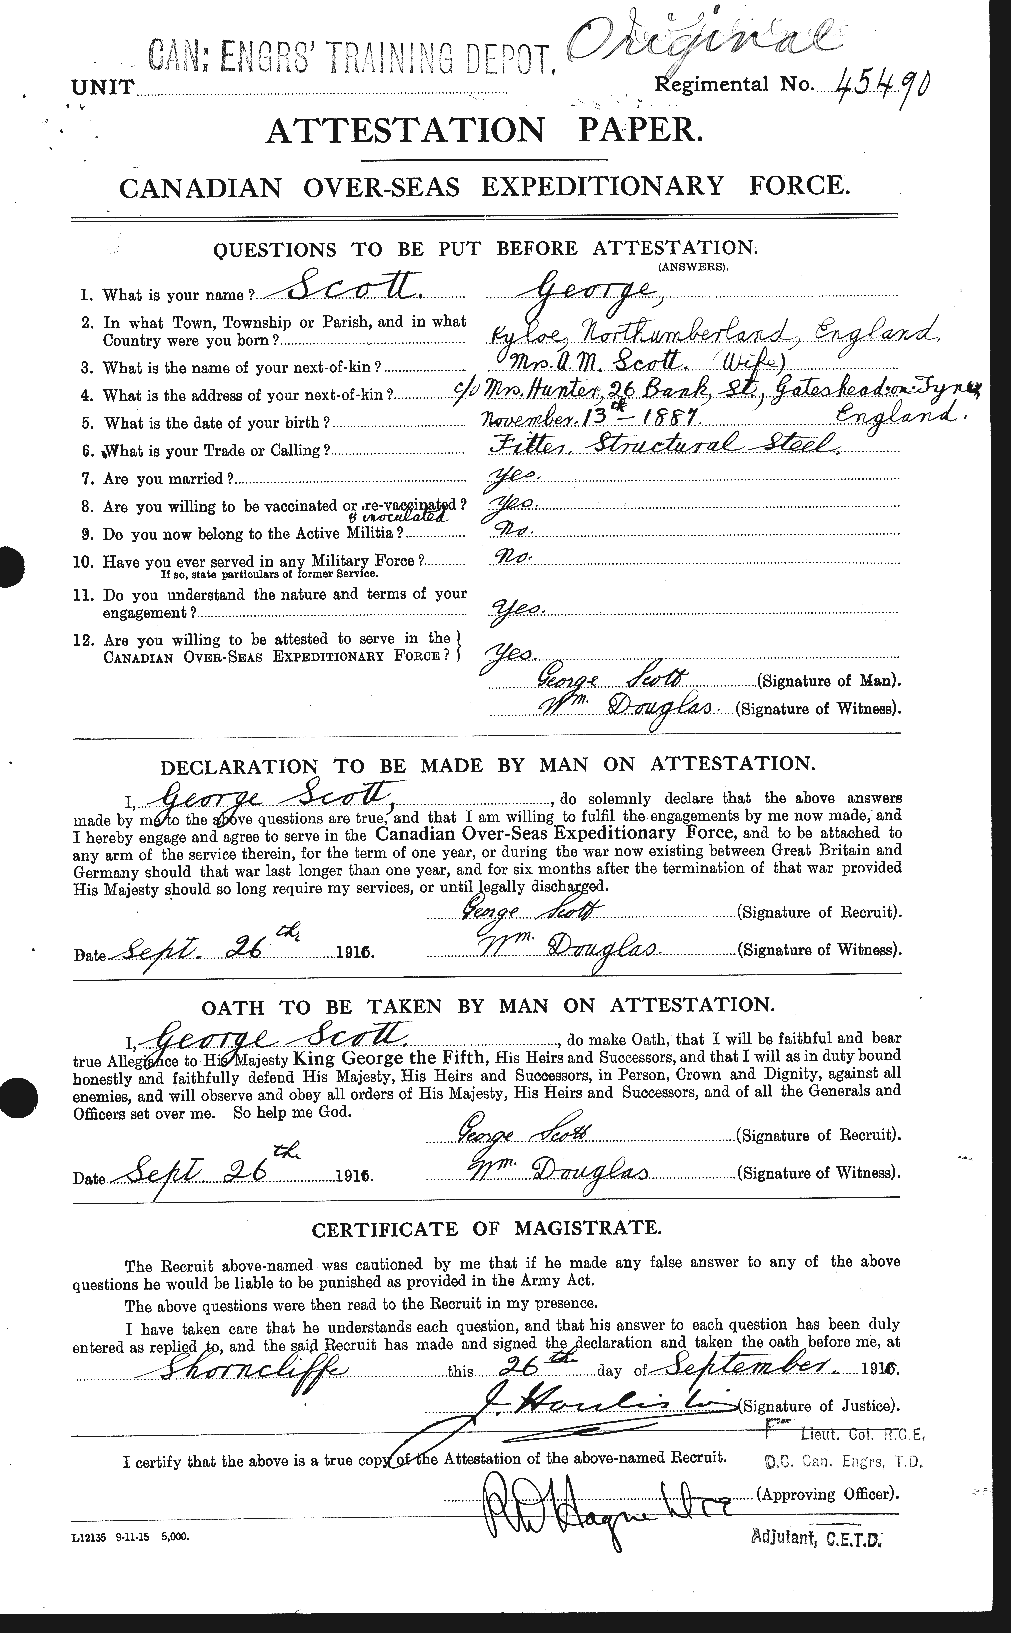 Personnel Records of the First World War - CEF 084363a